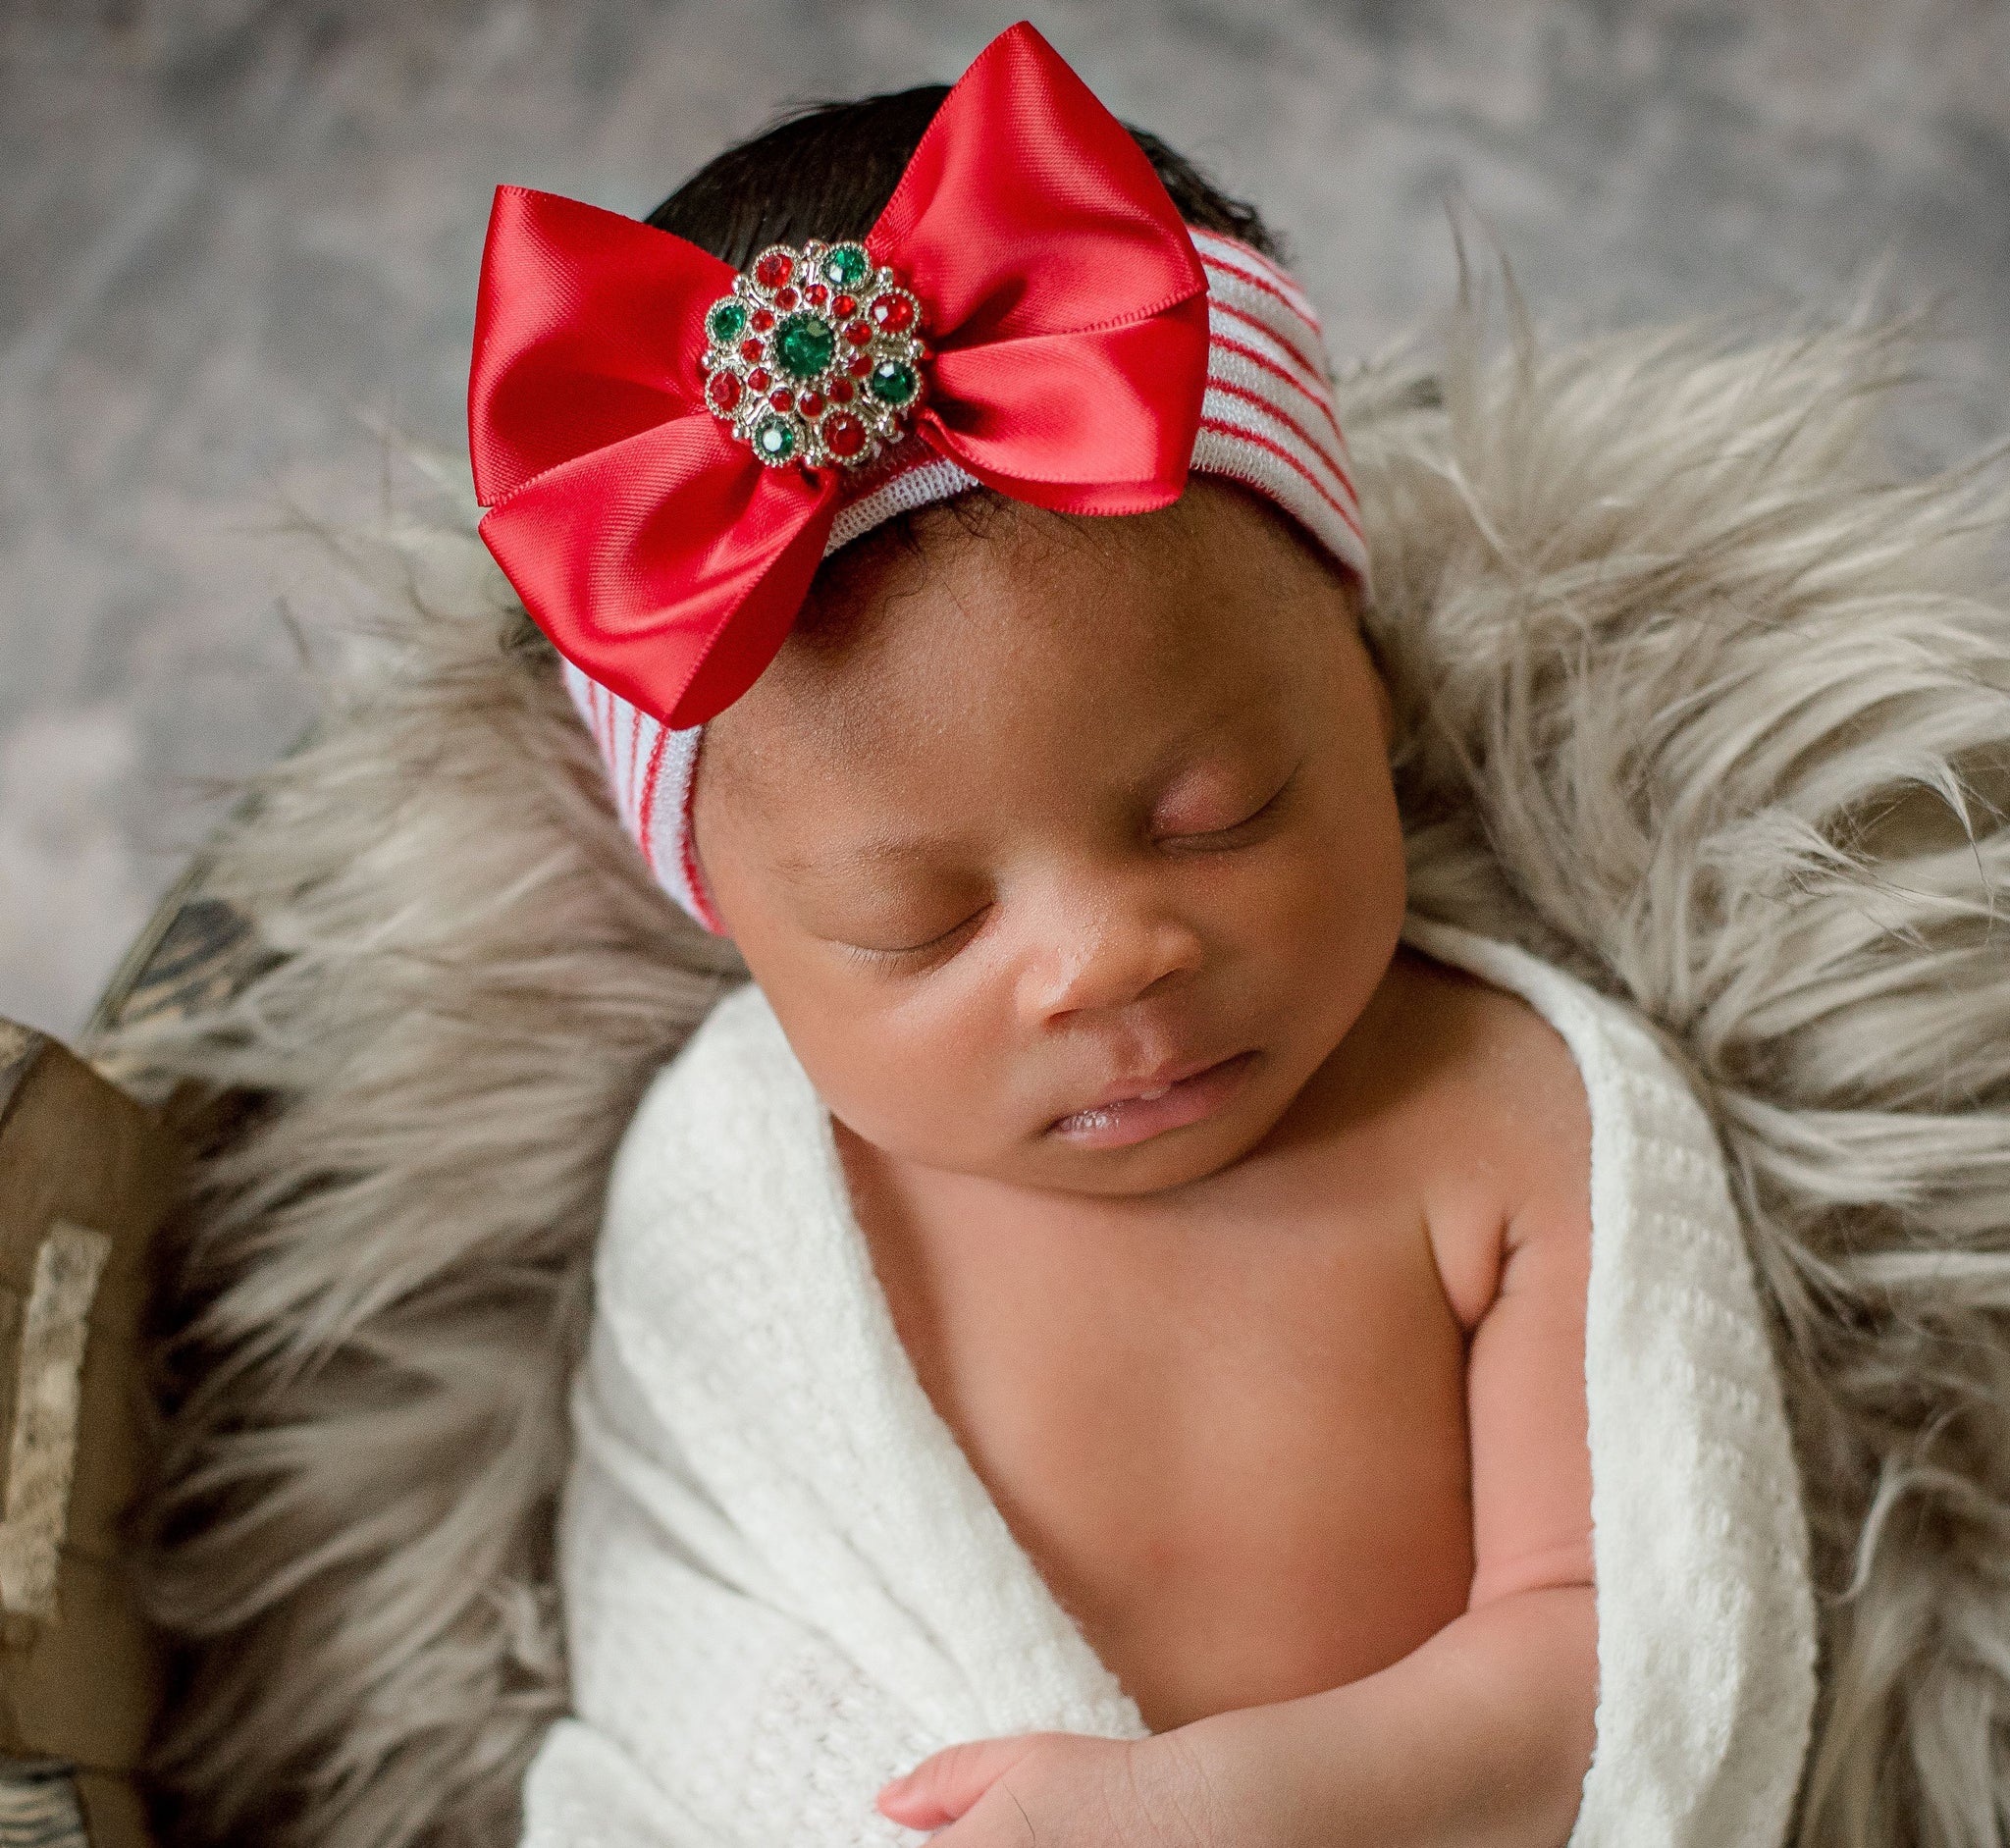 ilybean Red Satin Bow With Rhinestone Center With Red And White Hospital Hat Fabric Headband For Newborn Girls - Christmas Babies